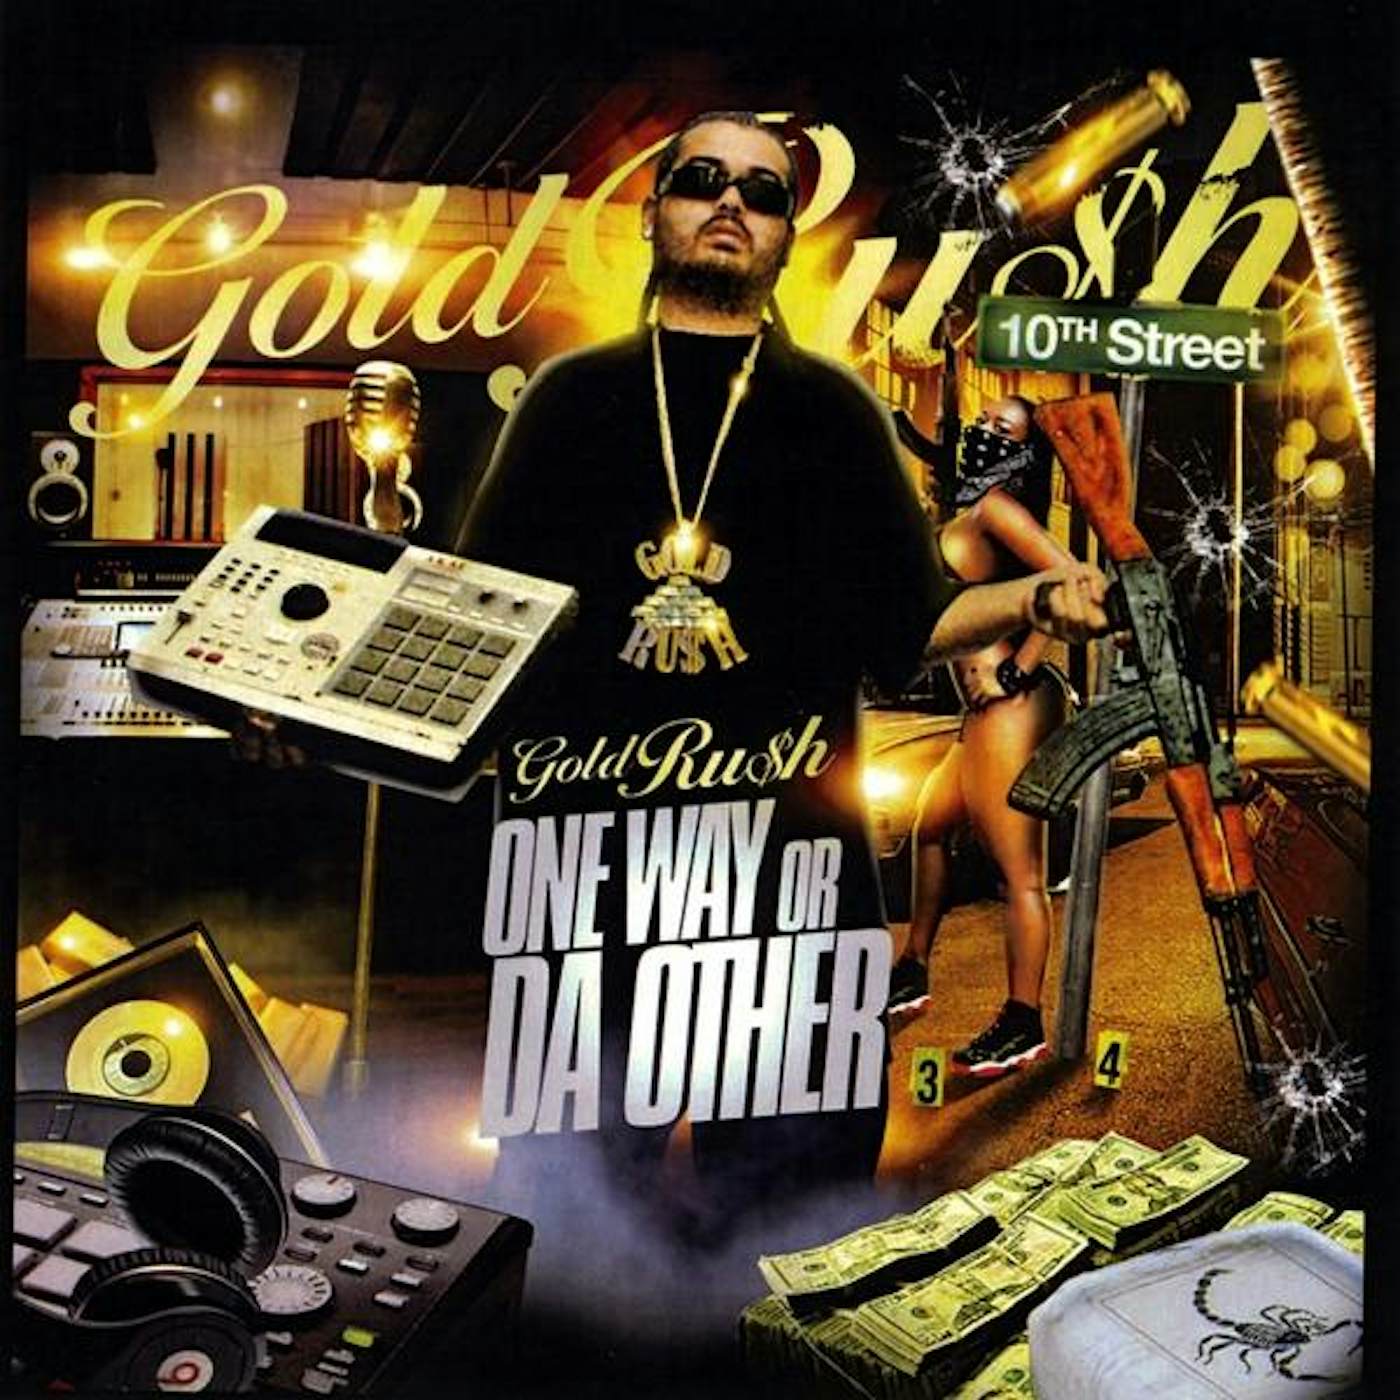 Gold Rush 1 WAY OR DA OTHER CD